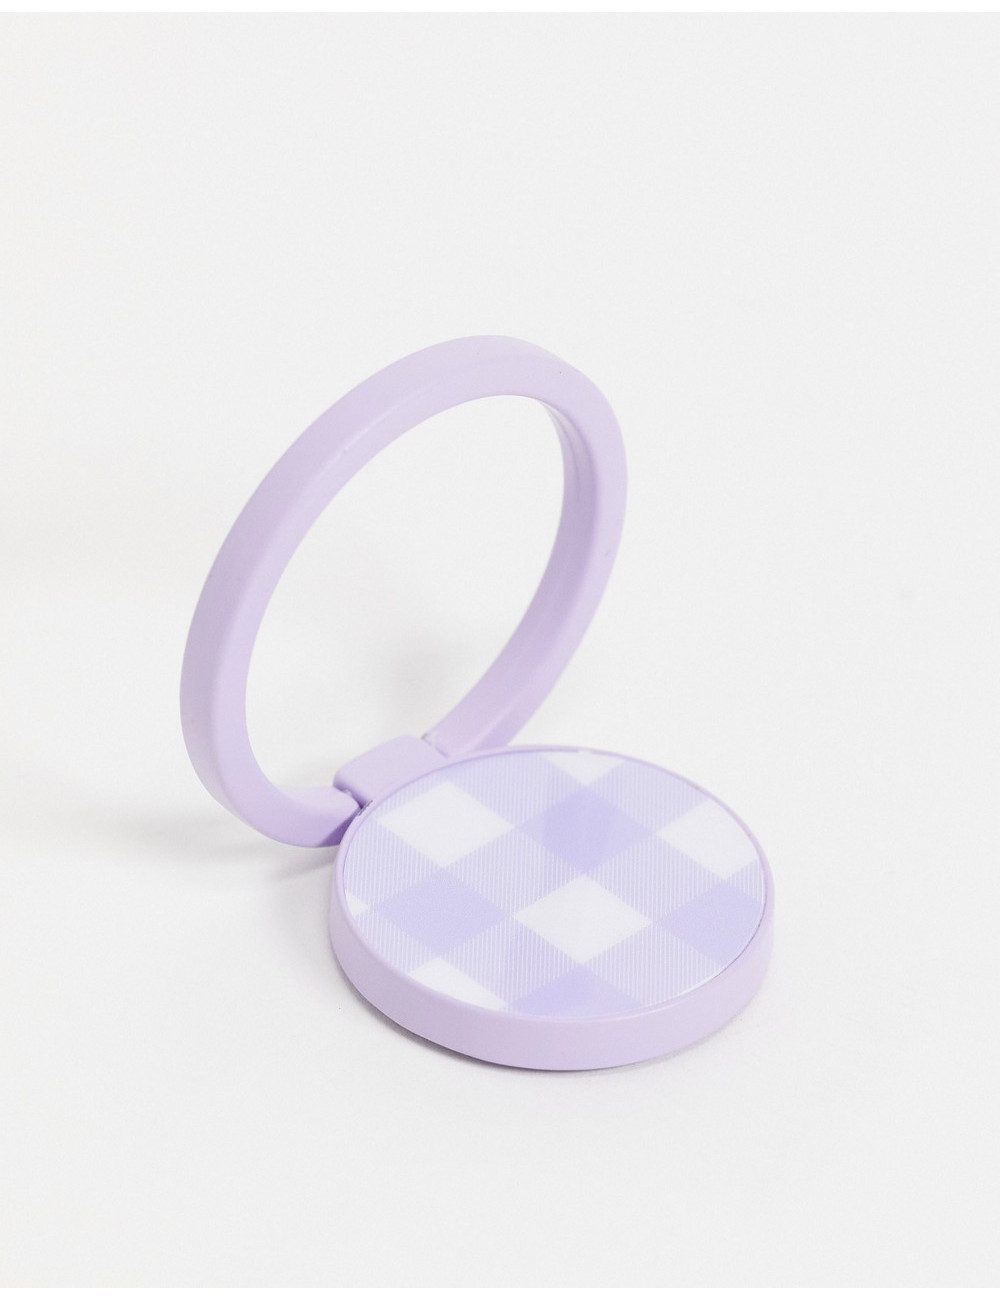 Typo phone stand in lilac